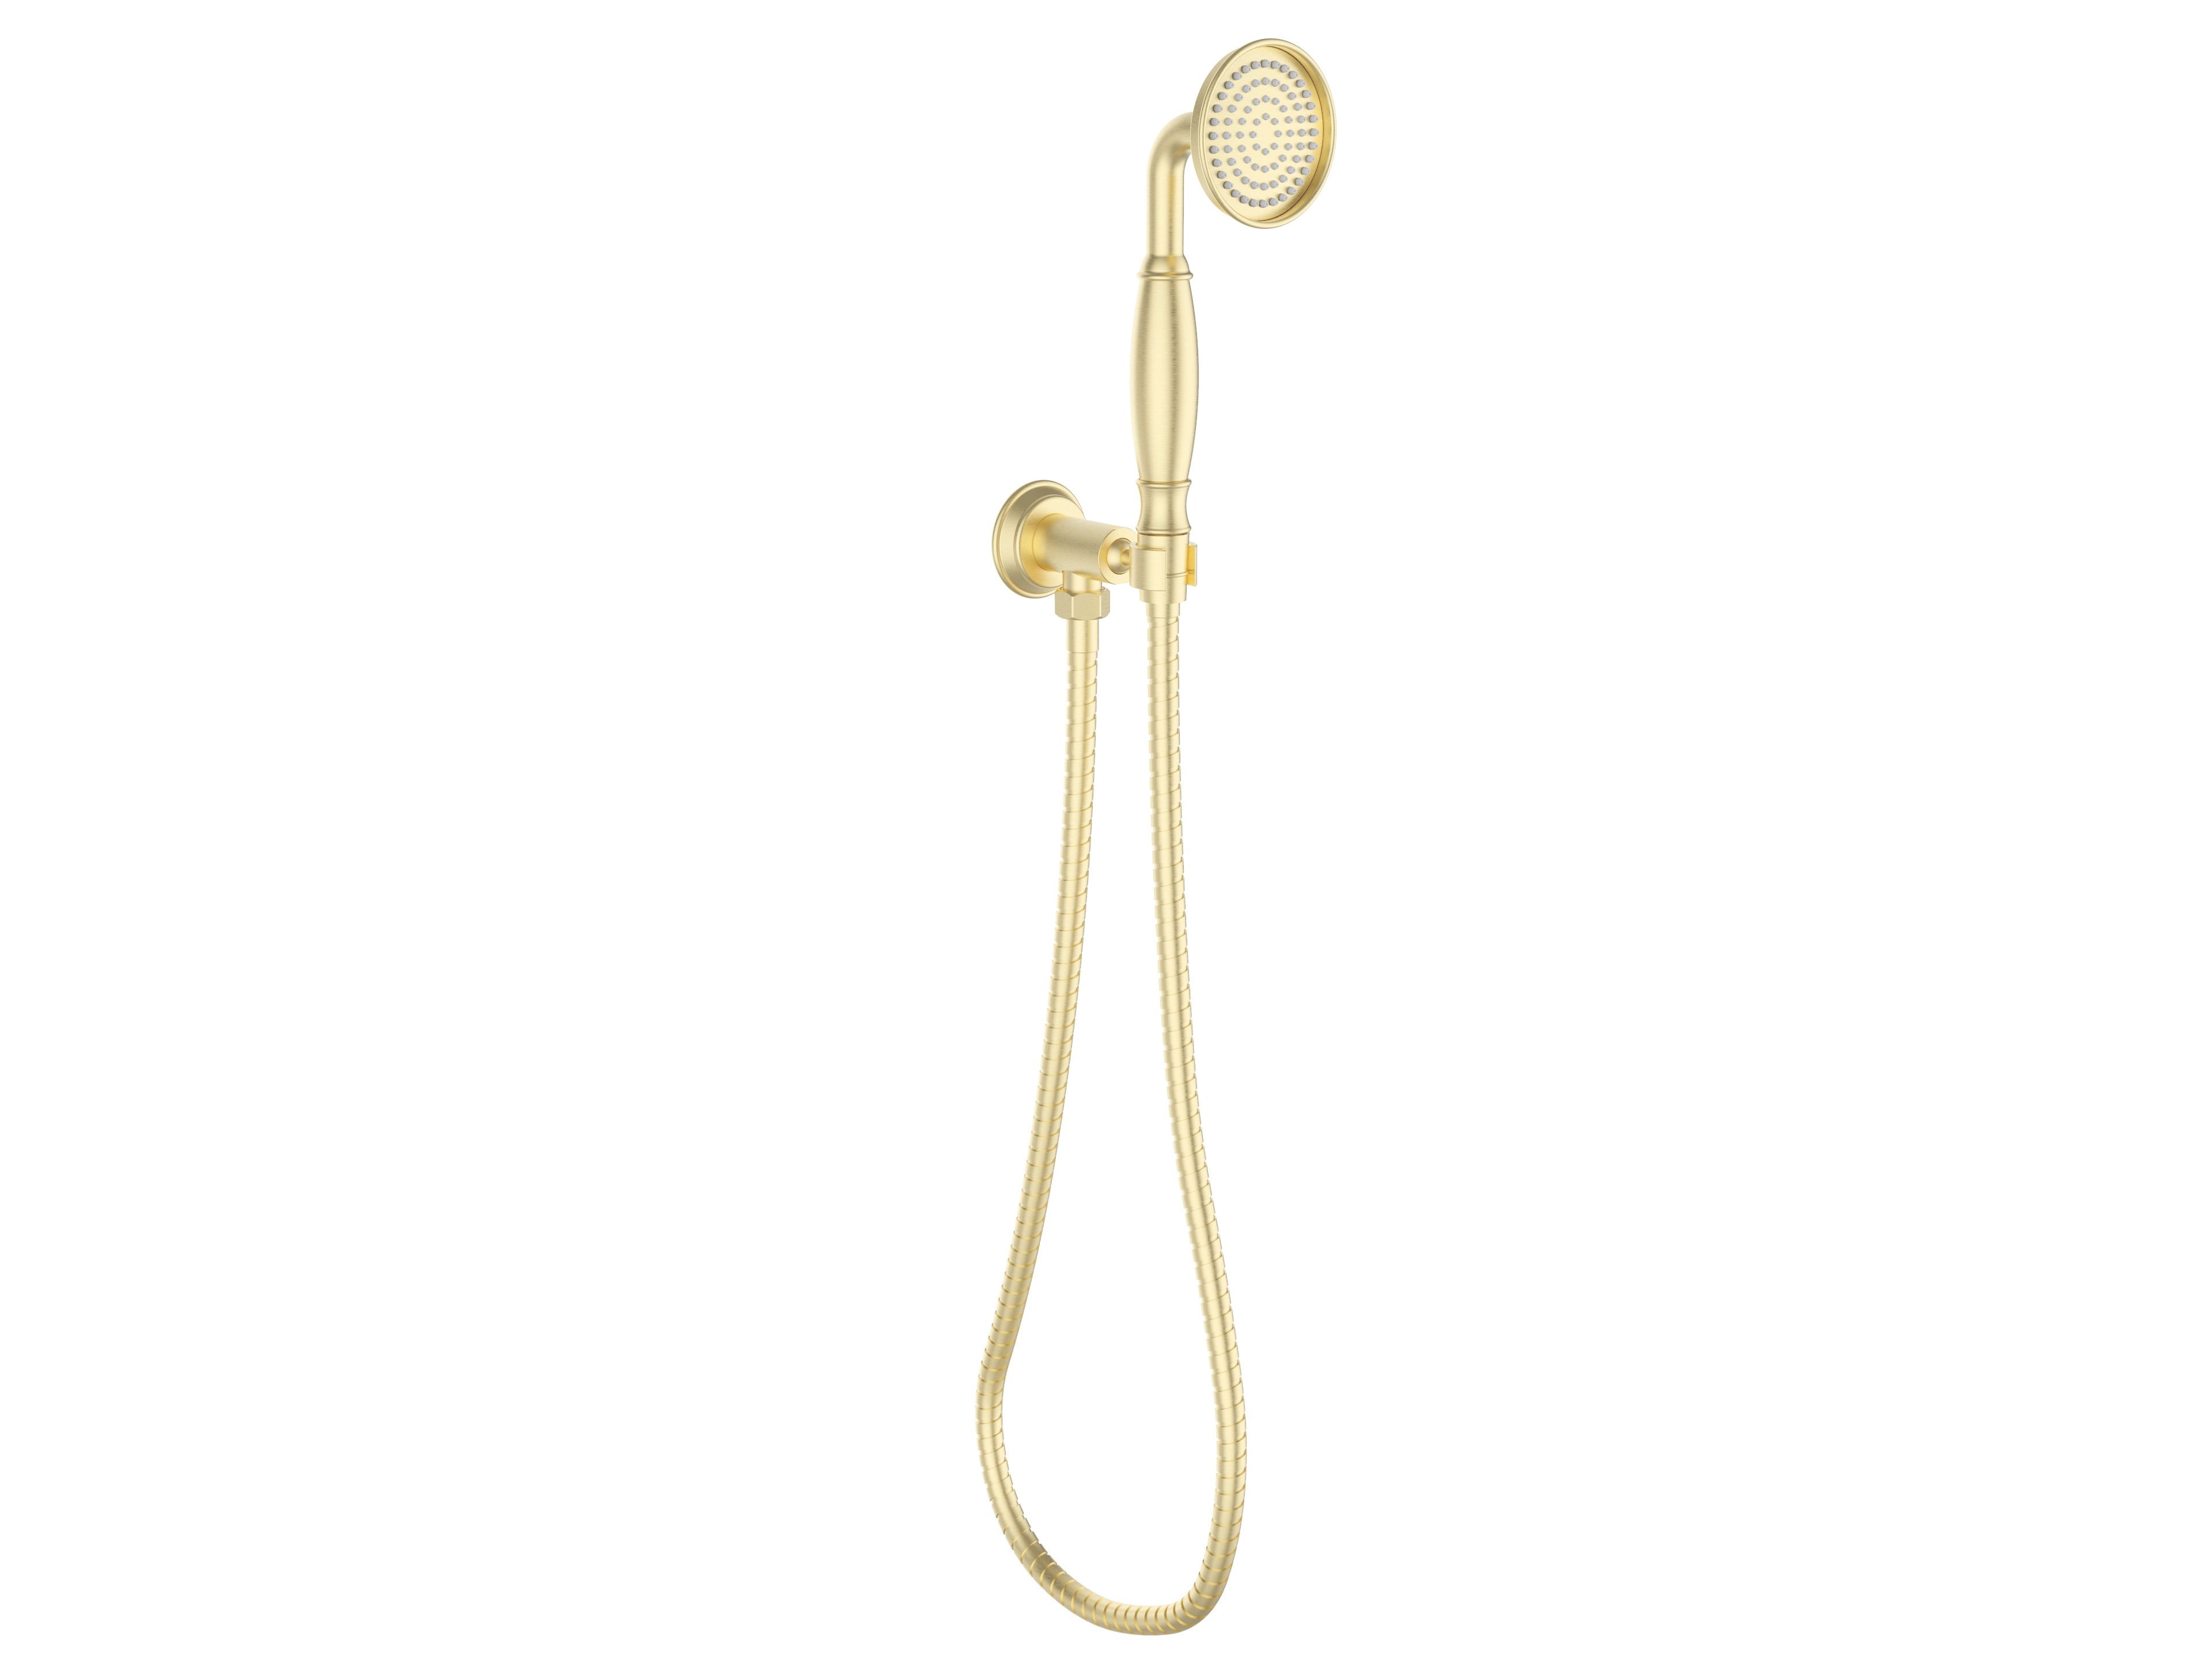 IKON CLASICO HAND SHOWER ON WALL OUTLET BRACKET BRUSHED GOLD